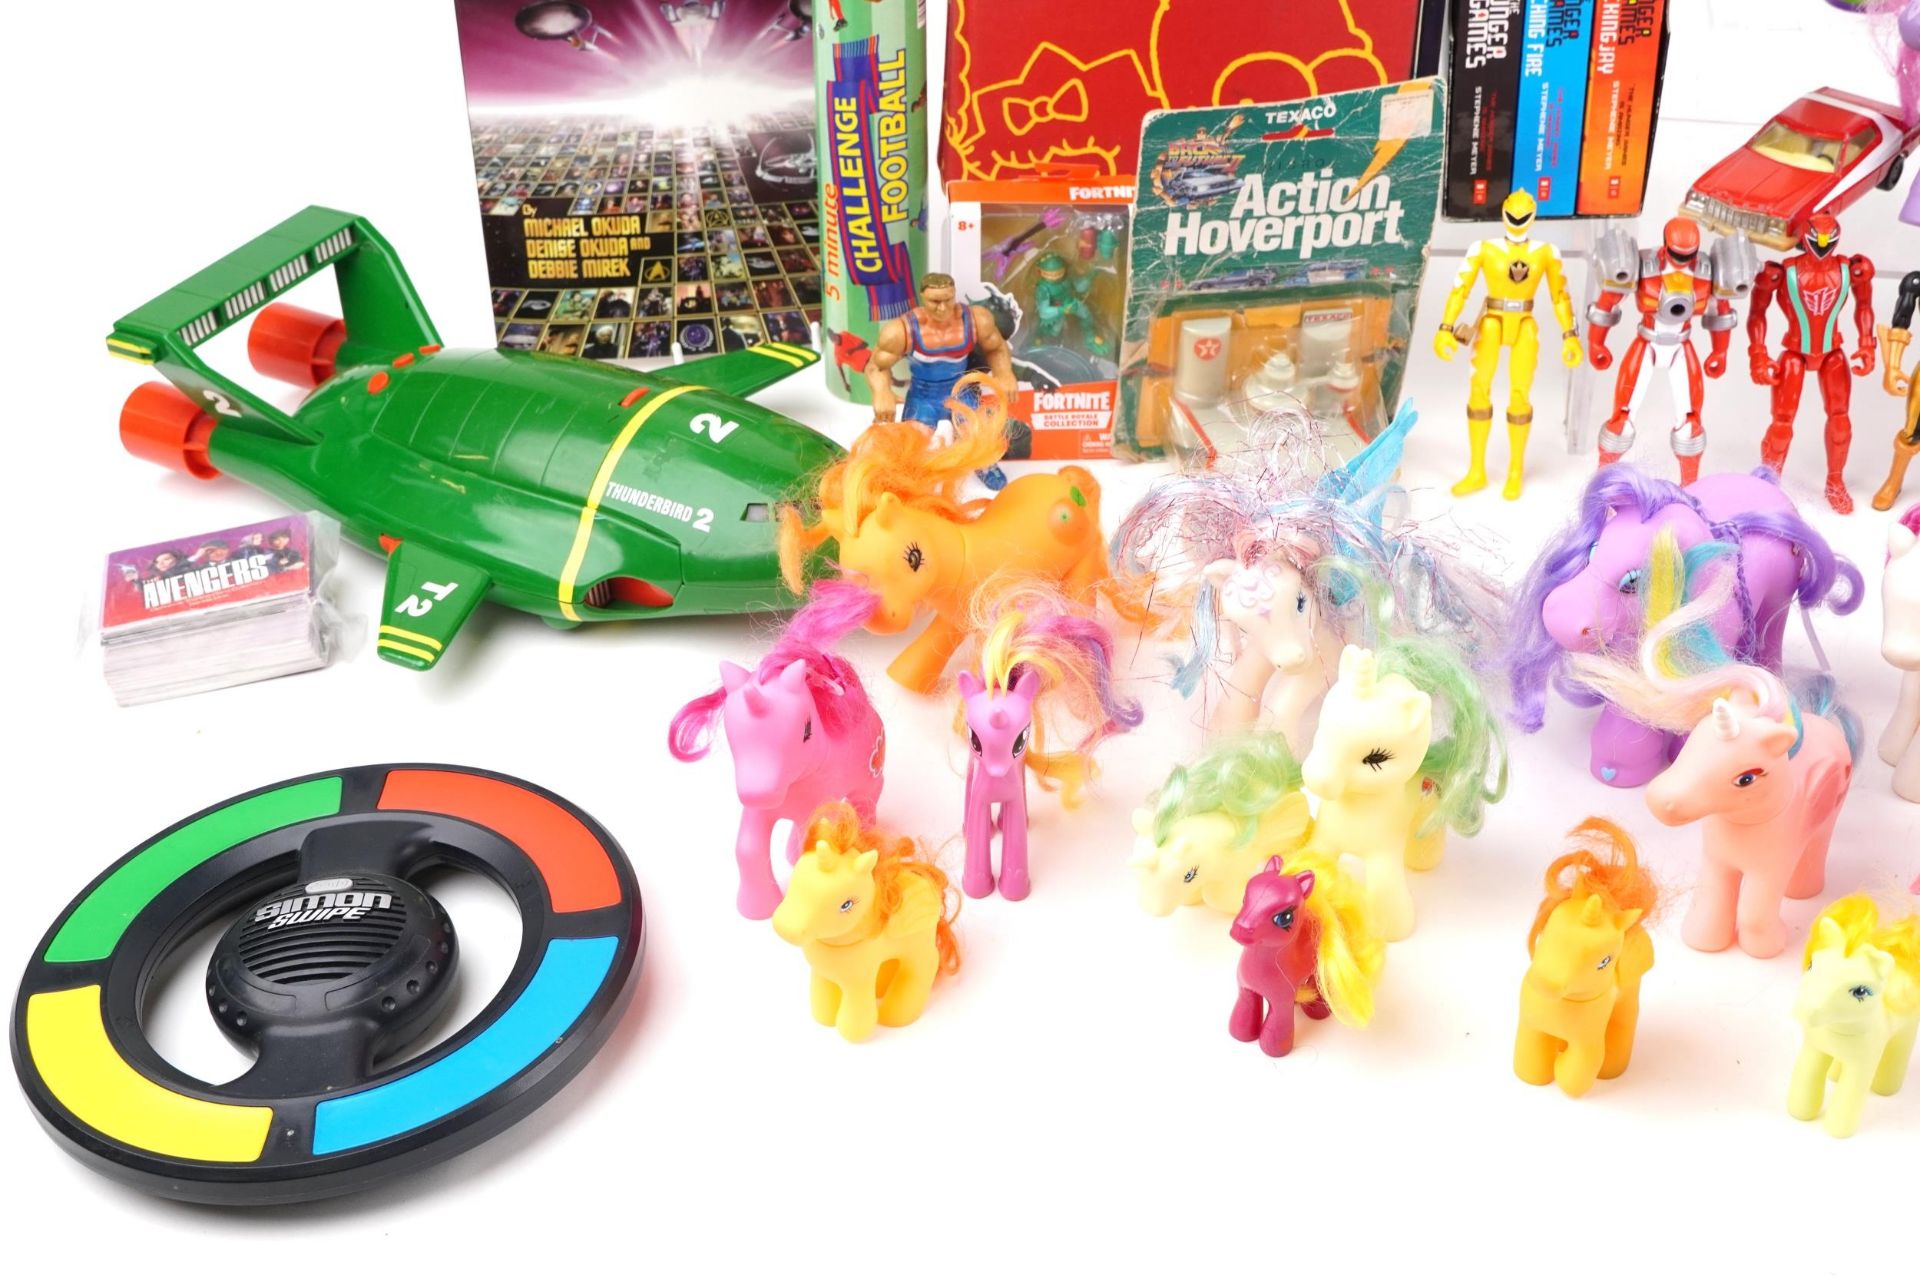 Vintage and later toys and related including My Little Ponies, Thunderbirds, Action Hover Port by - Image 4 of 6